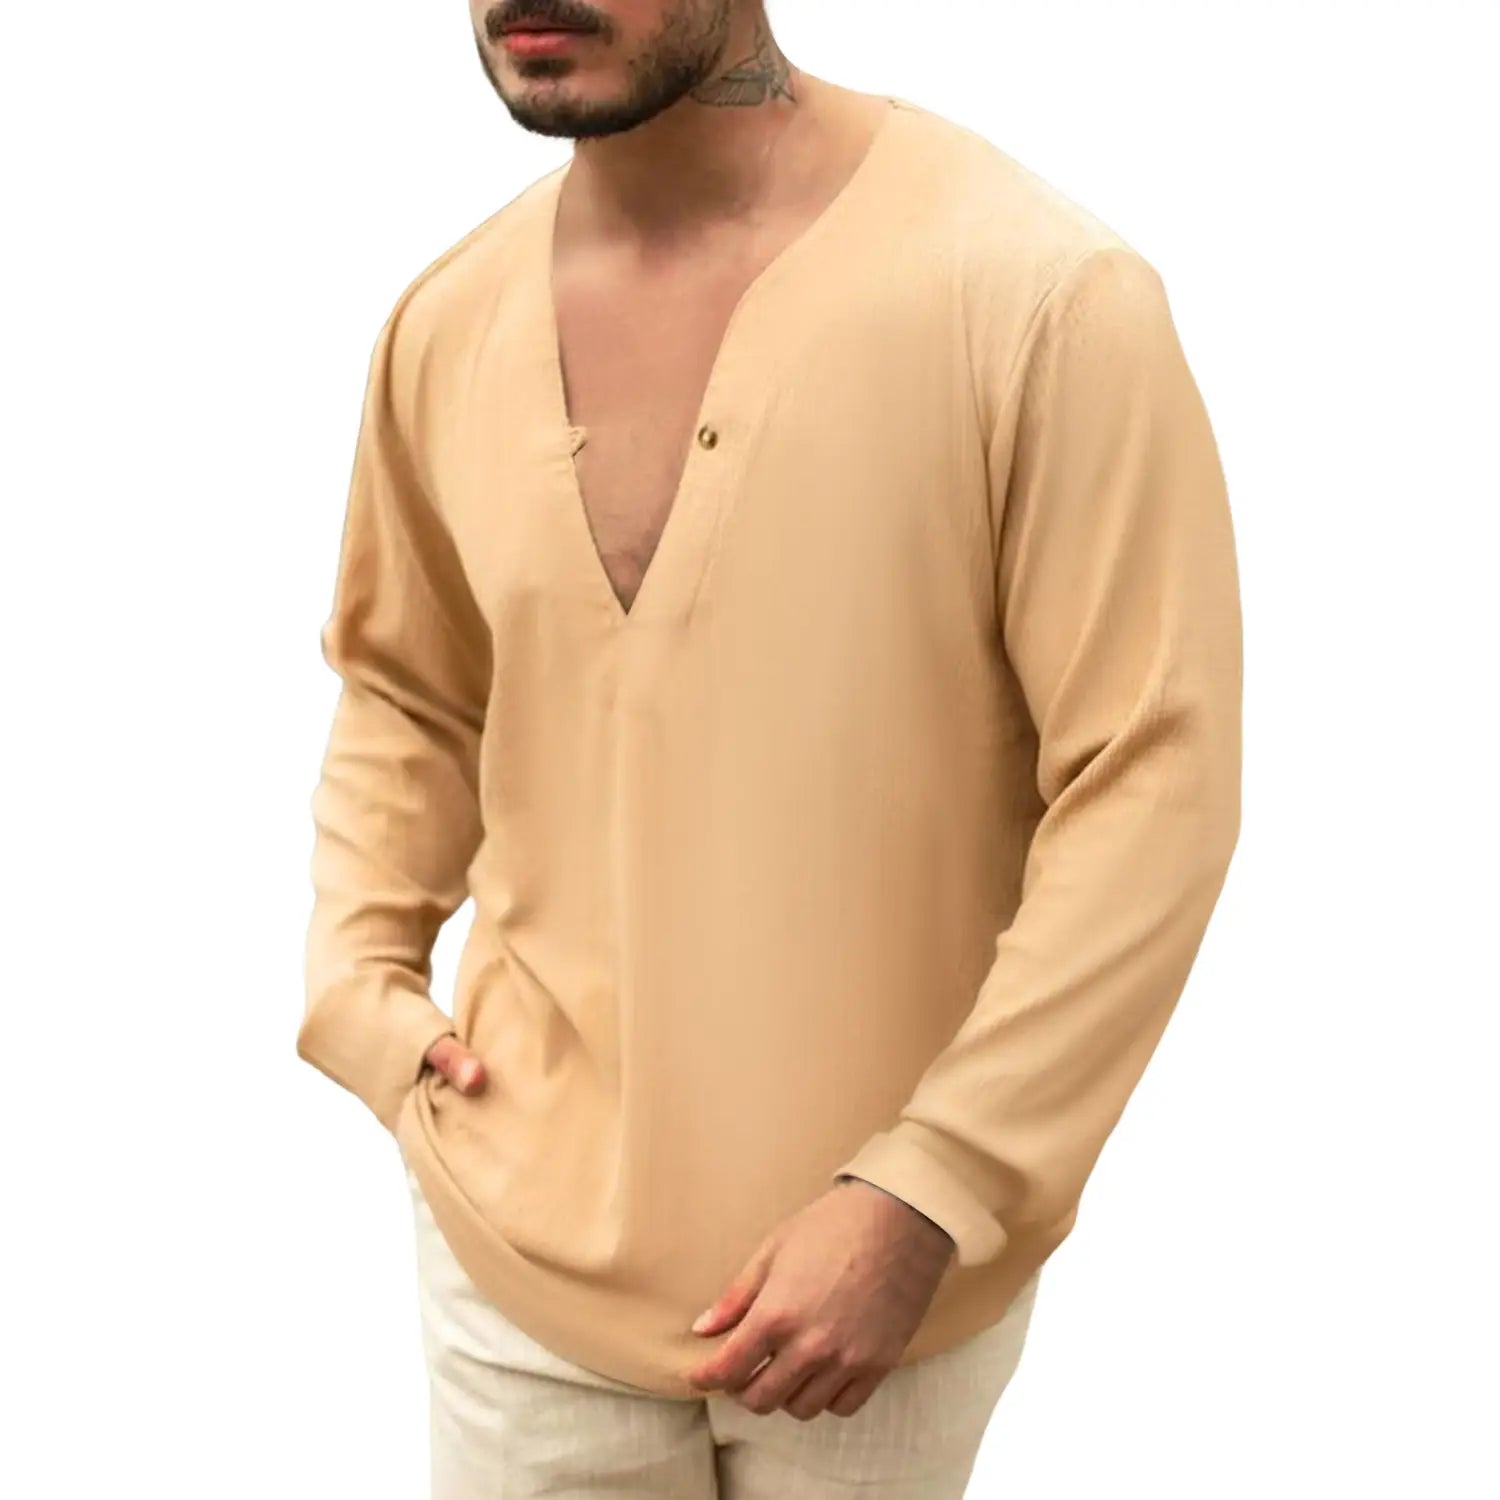 Lovemi - Men’s Casual Loose Solid Color Stretch Shirt